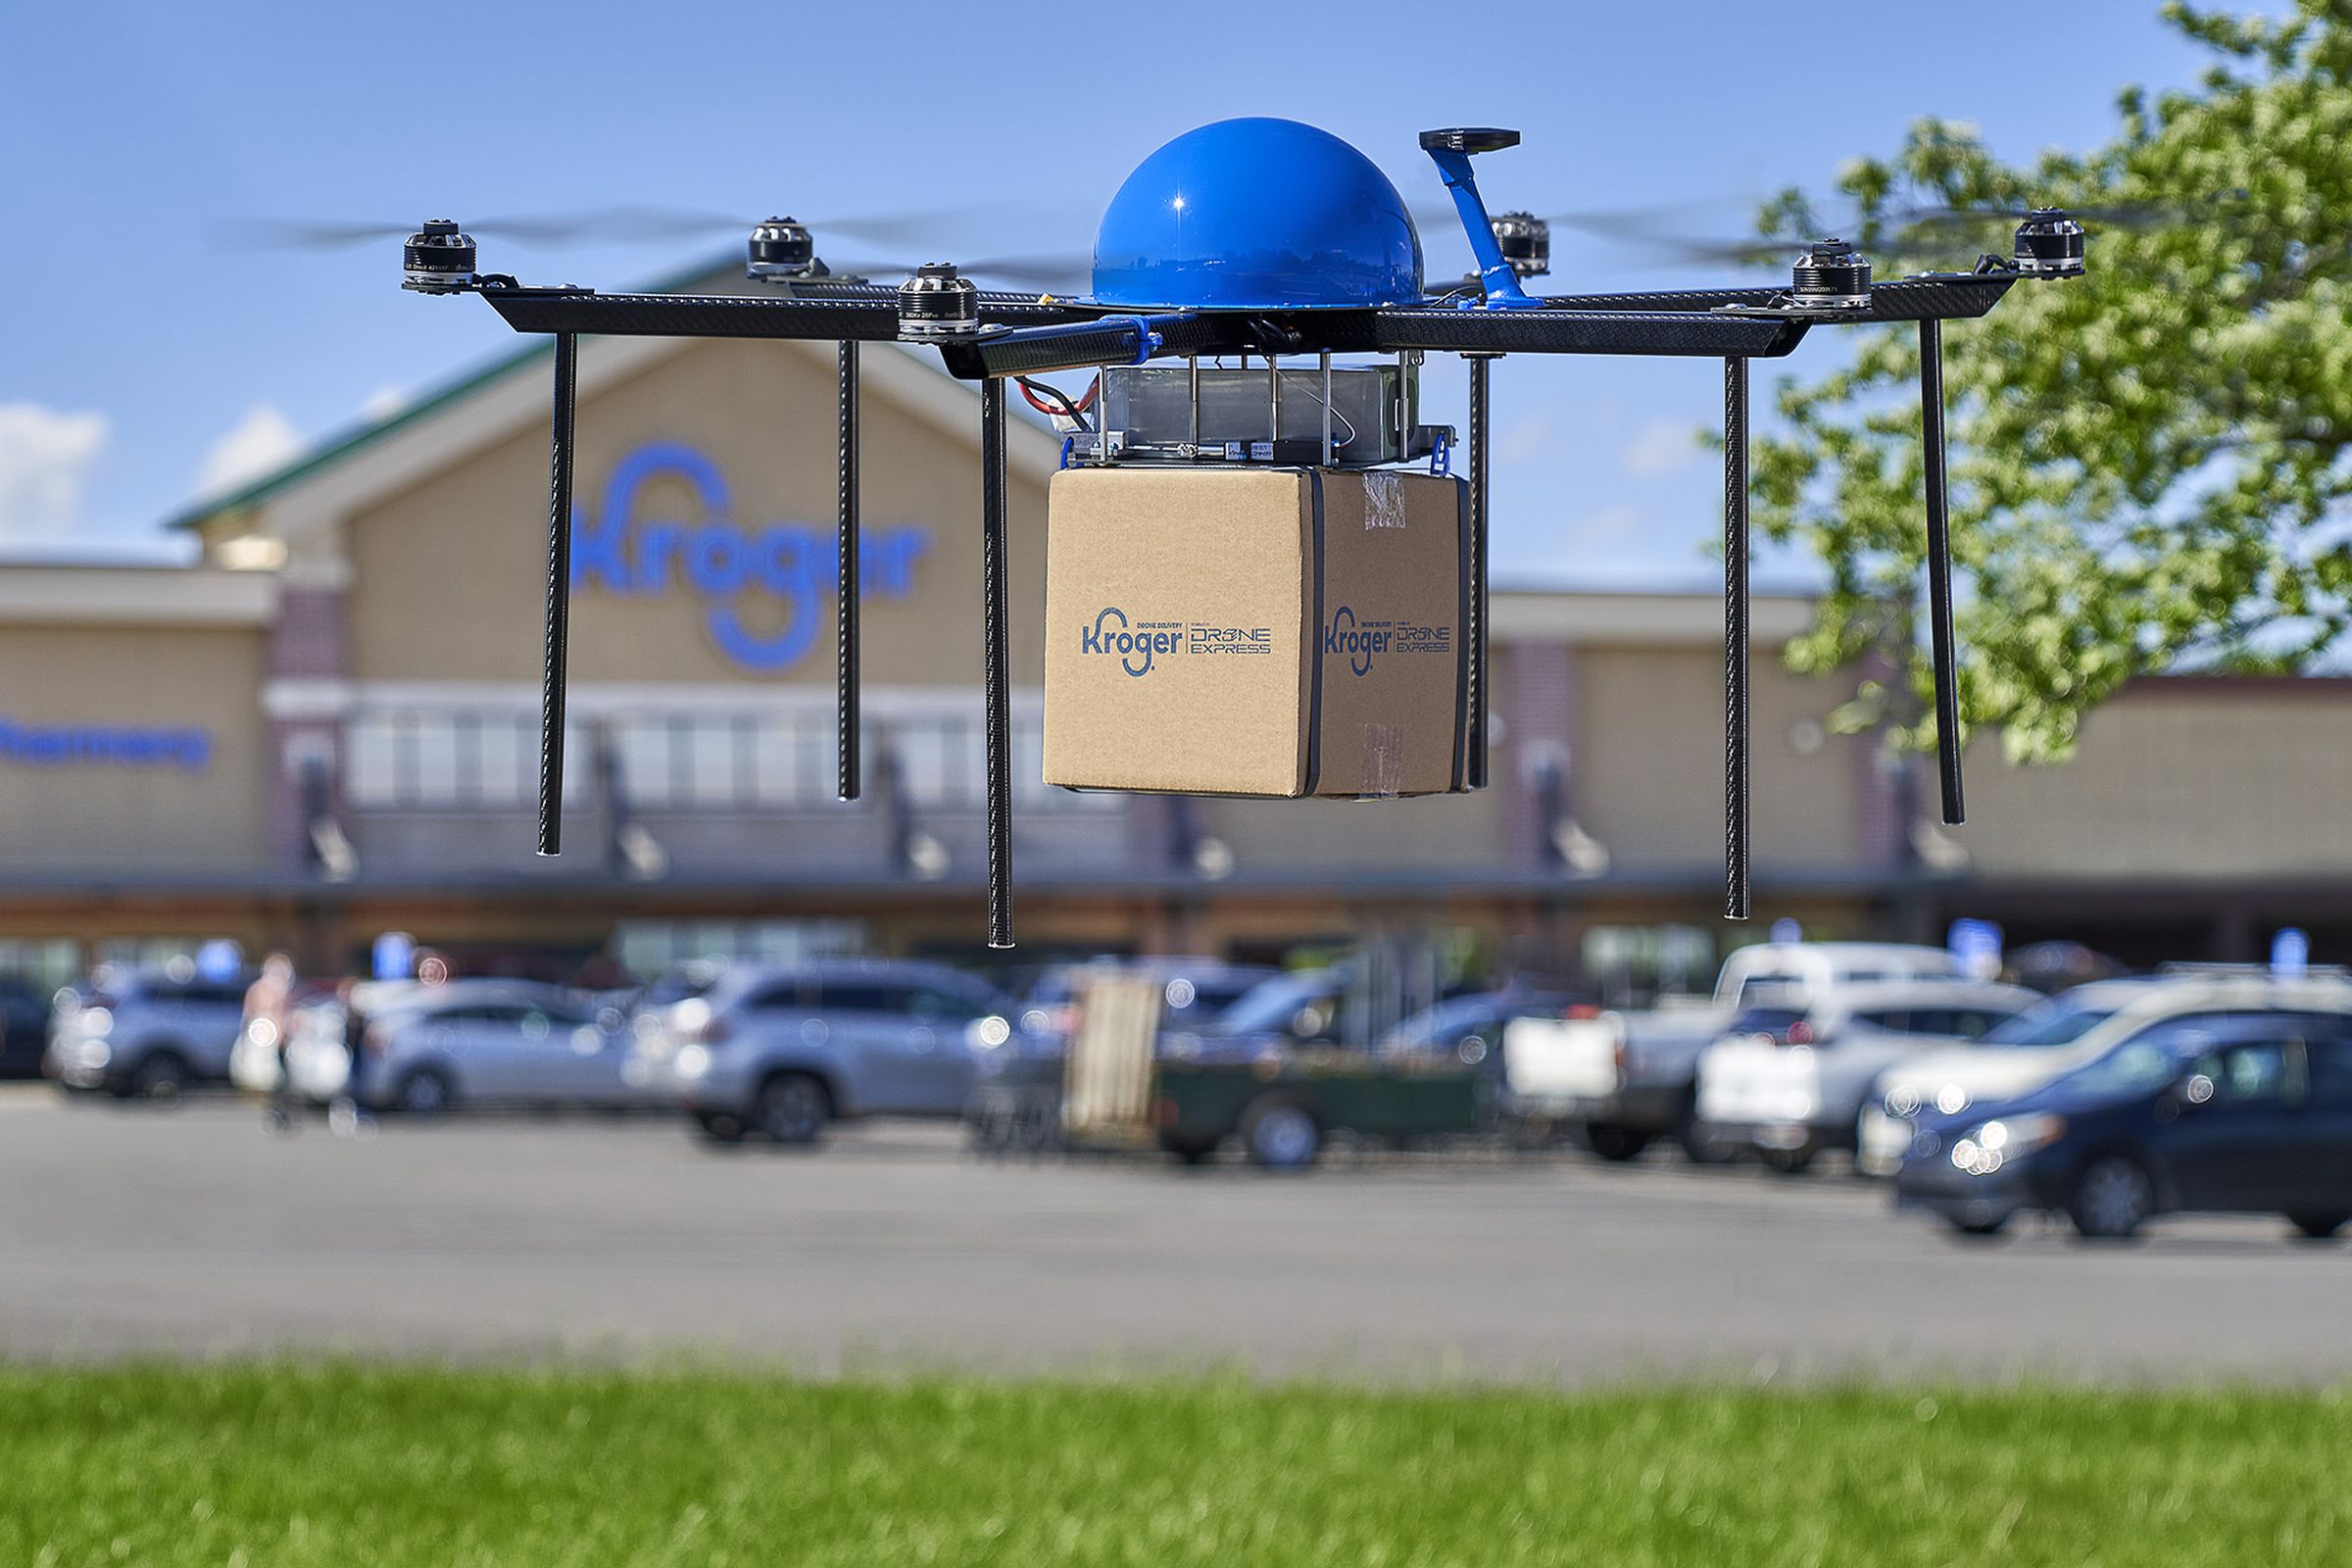 Kroger is partnering with Drone Express on deliveries of packages up to five pounds.